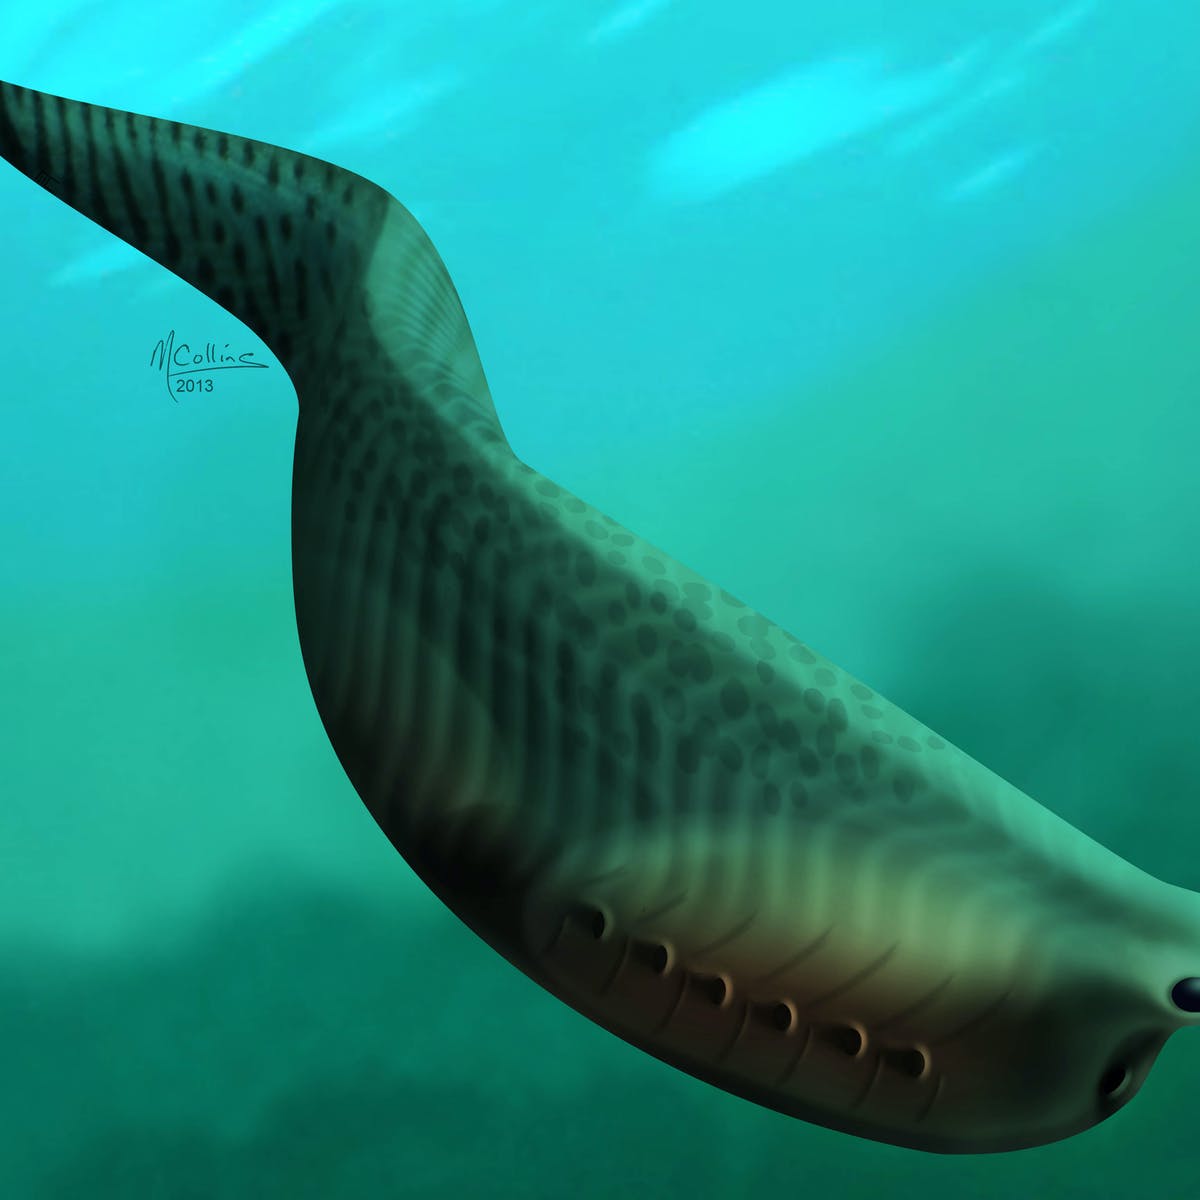 When was the first fish fossil found?